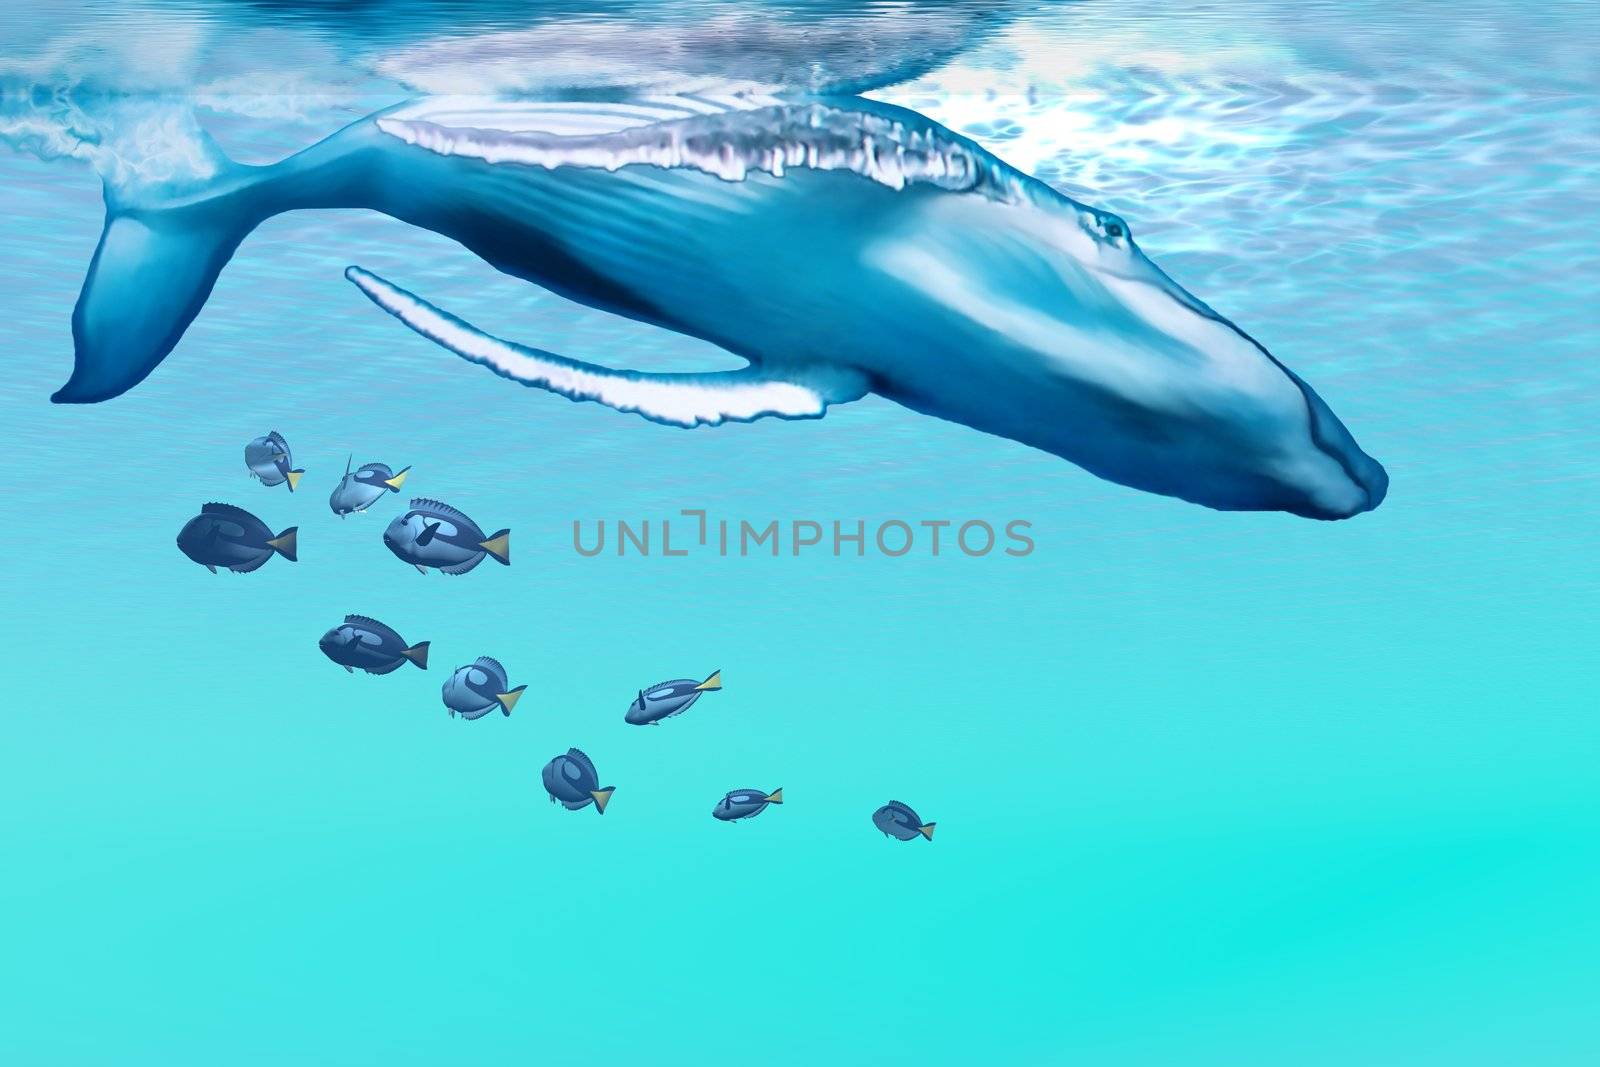 A Humpback whale dives into the blue ocean.